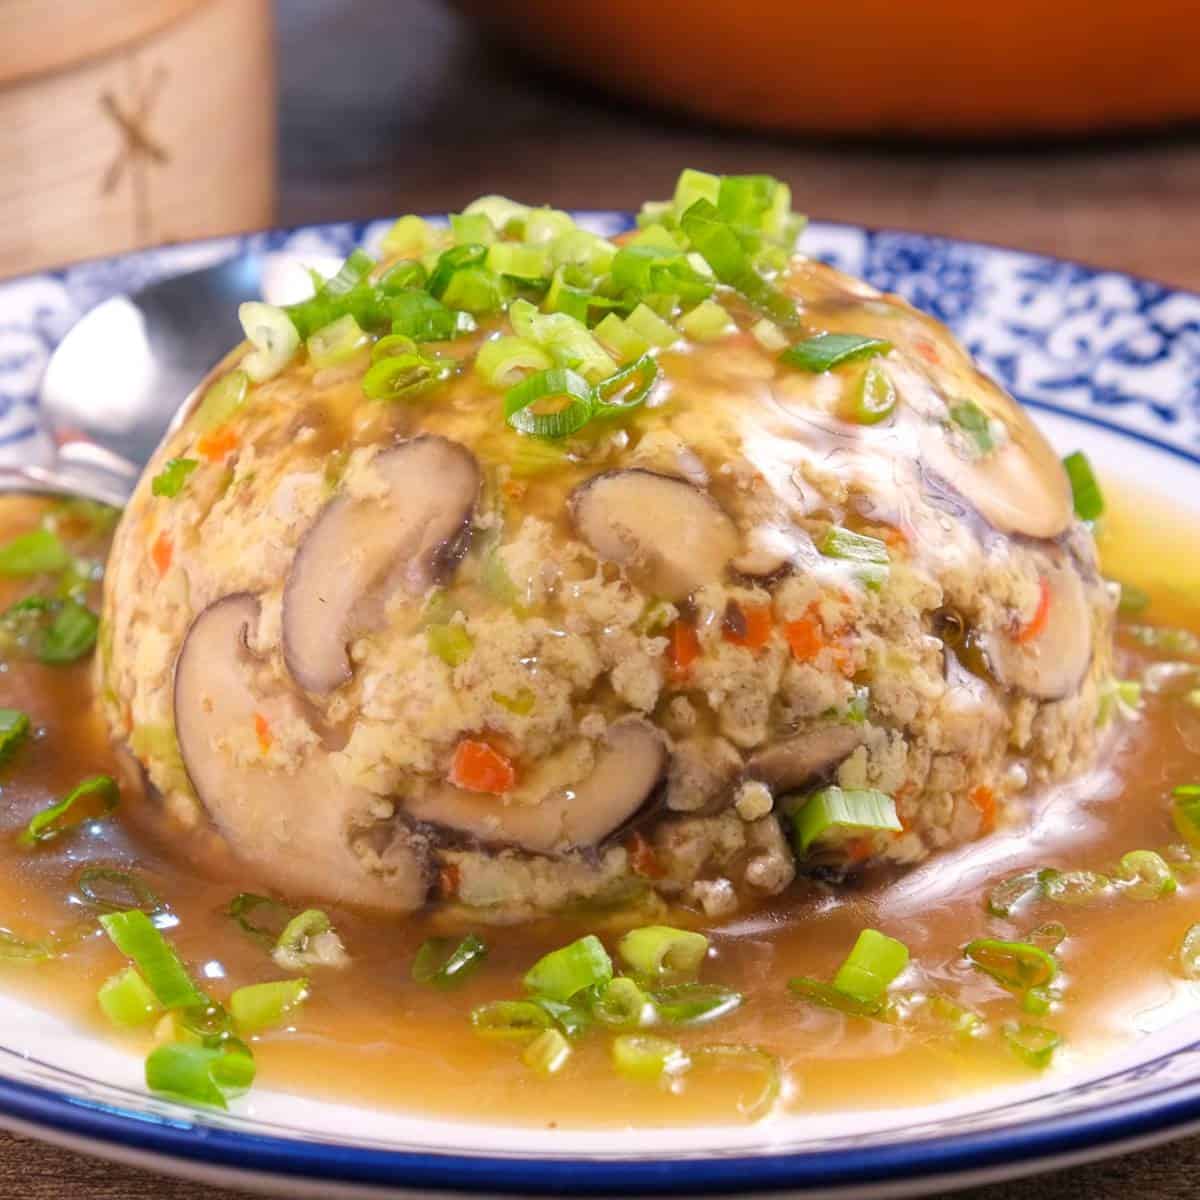 Homemade keto egg foo young served on a plate with gravy and garnished with green herbs.